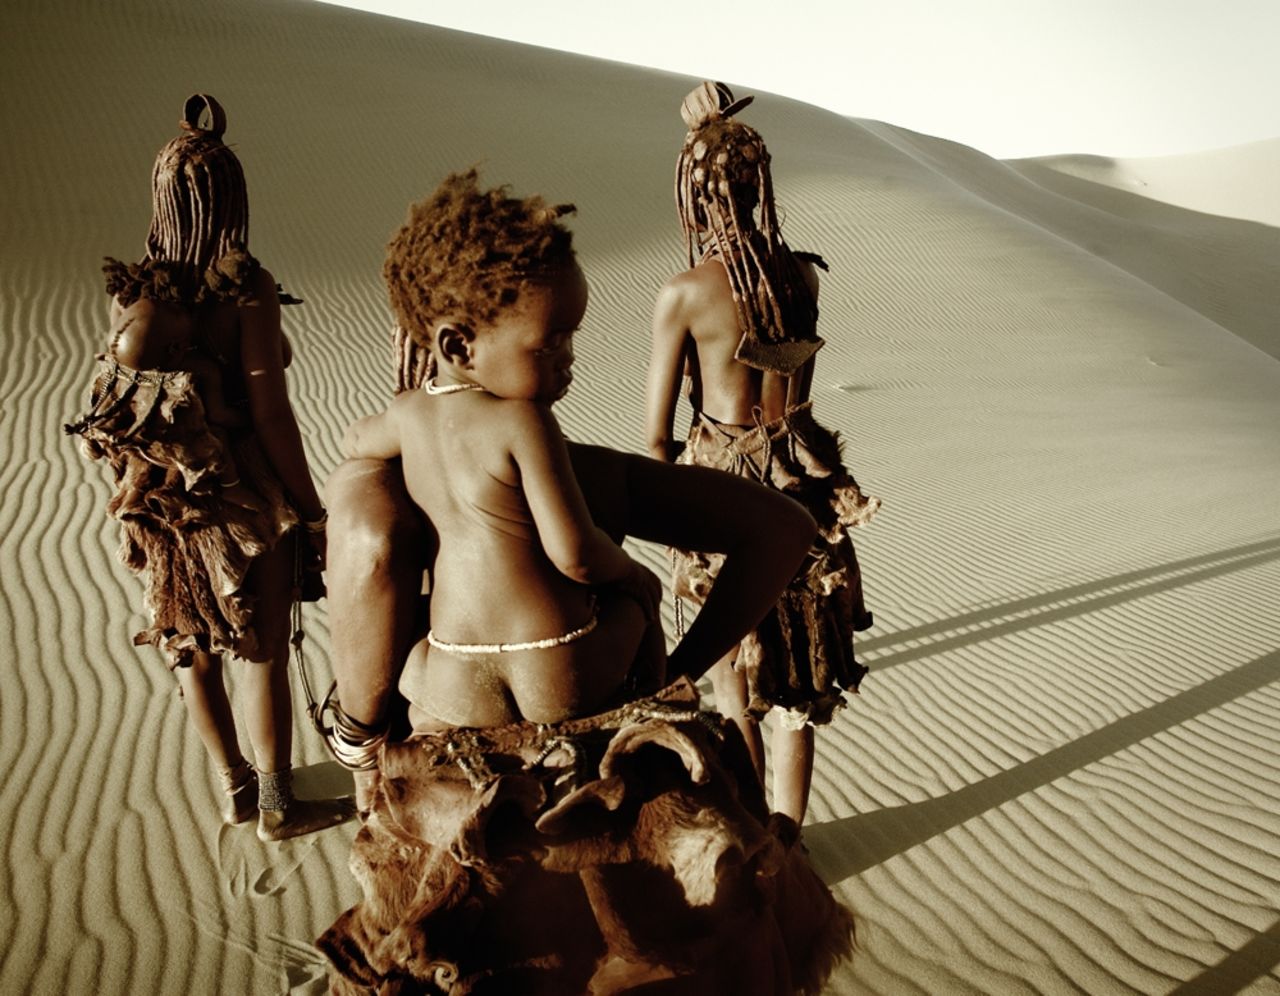 One thing that stood out to Nelson when meeting the different African tribes was their awareness of their appearances, including the "beautiful" Himba.